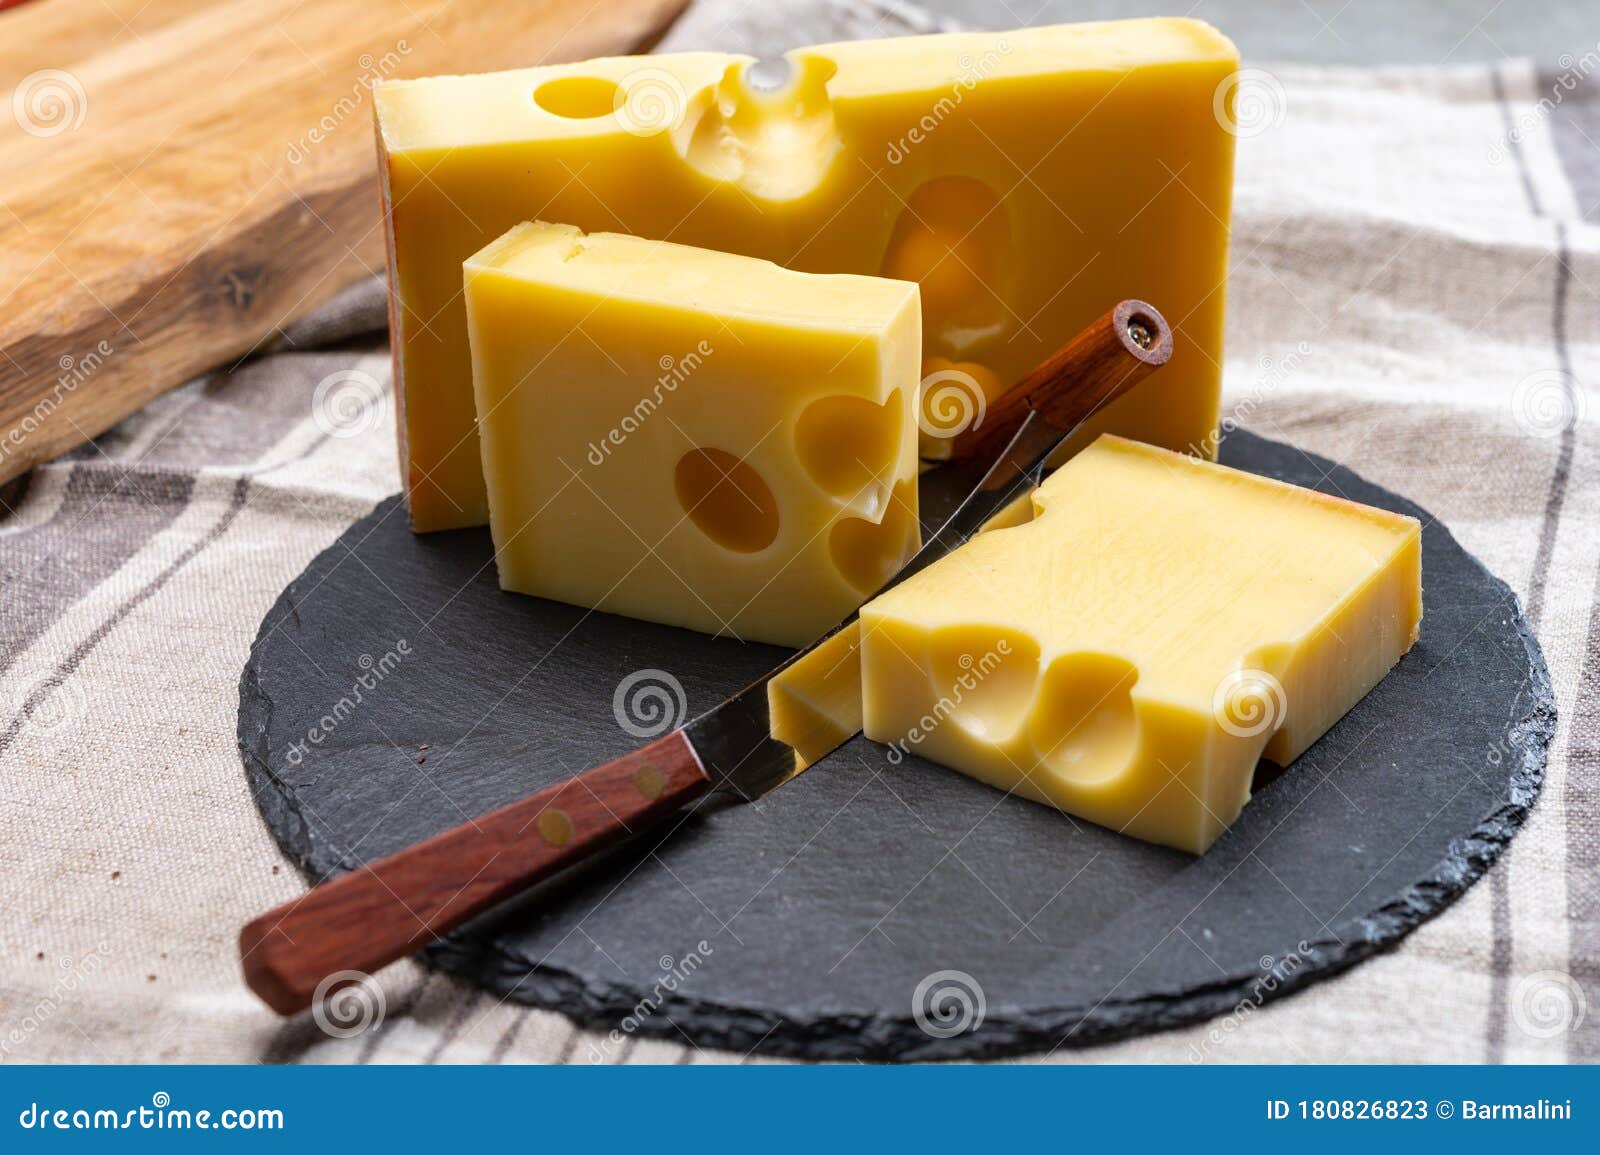 Block Of Swiss Medium Hard Yellow Cheese Emmental Or Emmentaler With Round Holes And Cheese Knife Stock Image Image Of Dinner Gratin 180826823,White Asparagus Vs Green